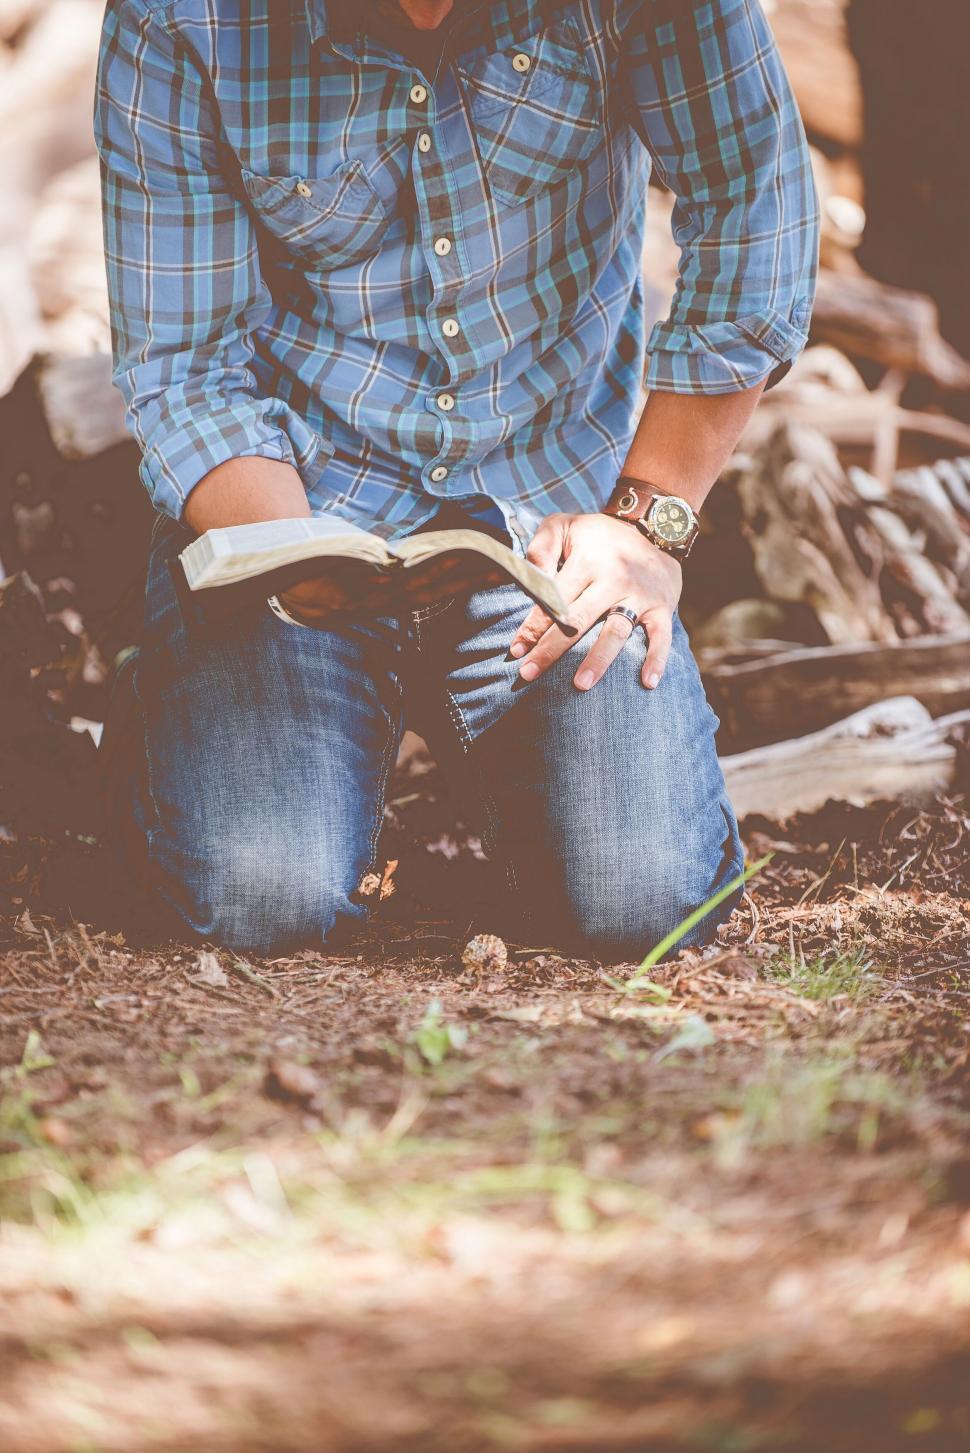 Free Image of Man kneeling and reading a book in nature 